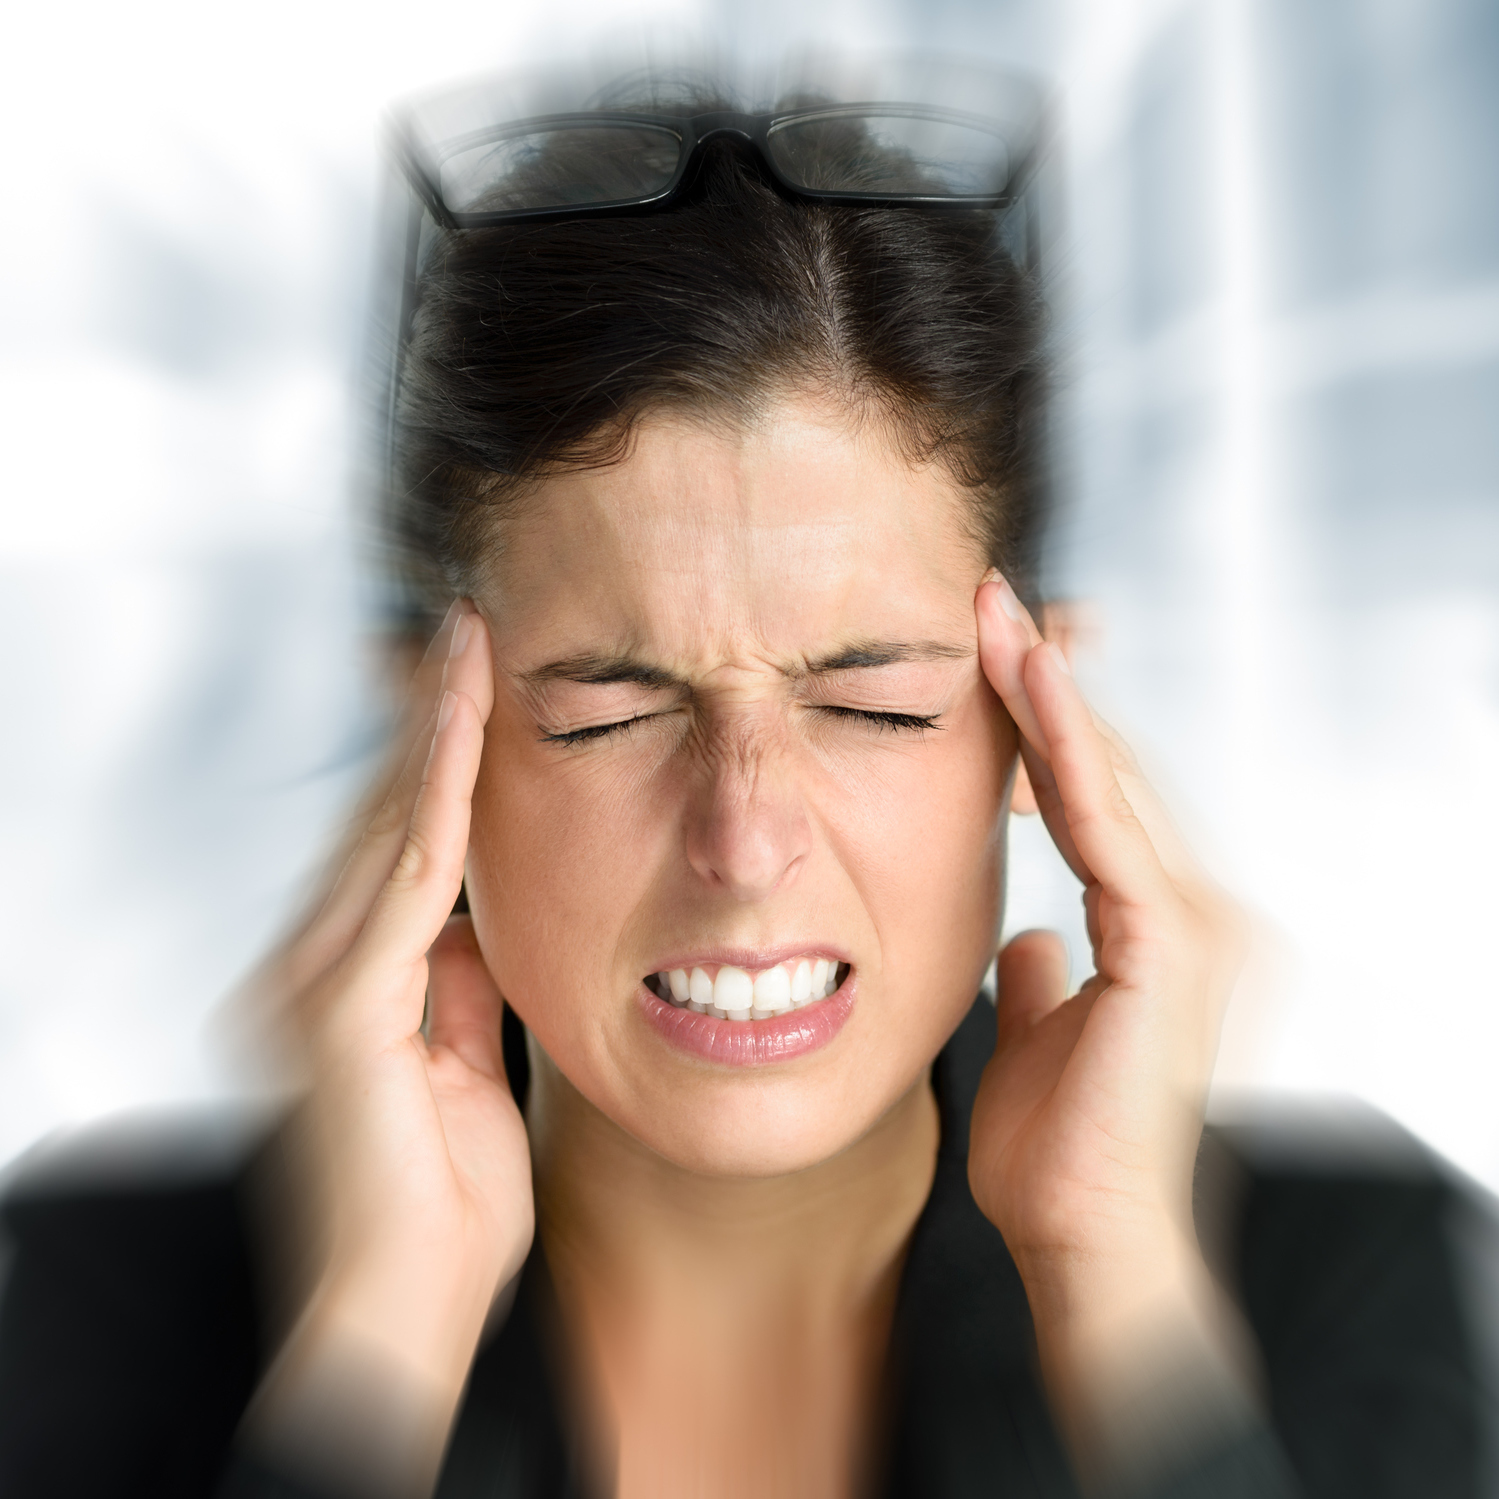 woman feeling dizzy and holding her head